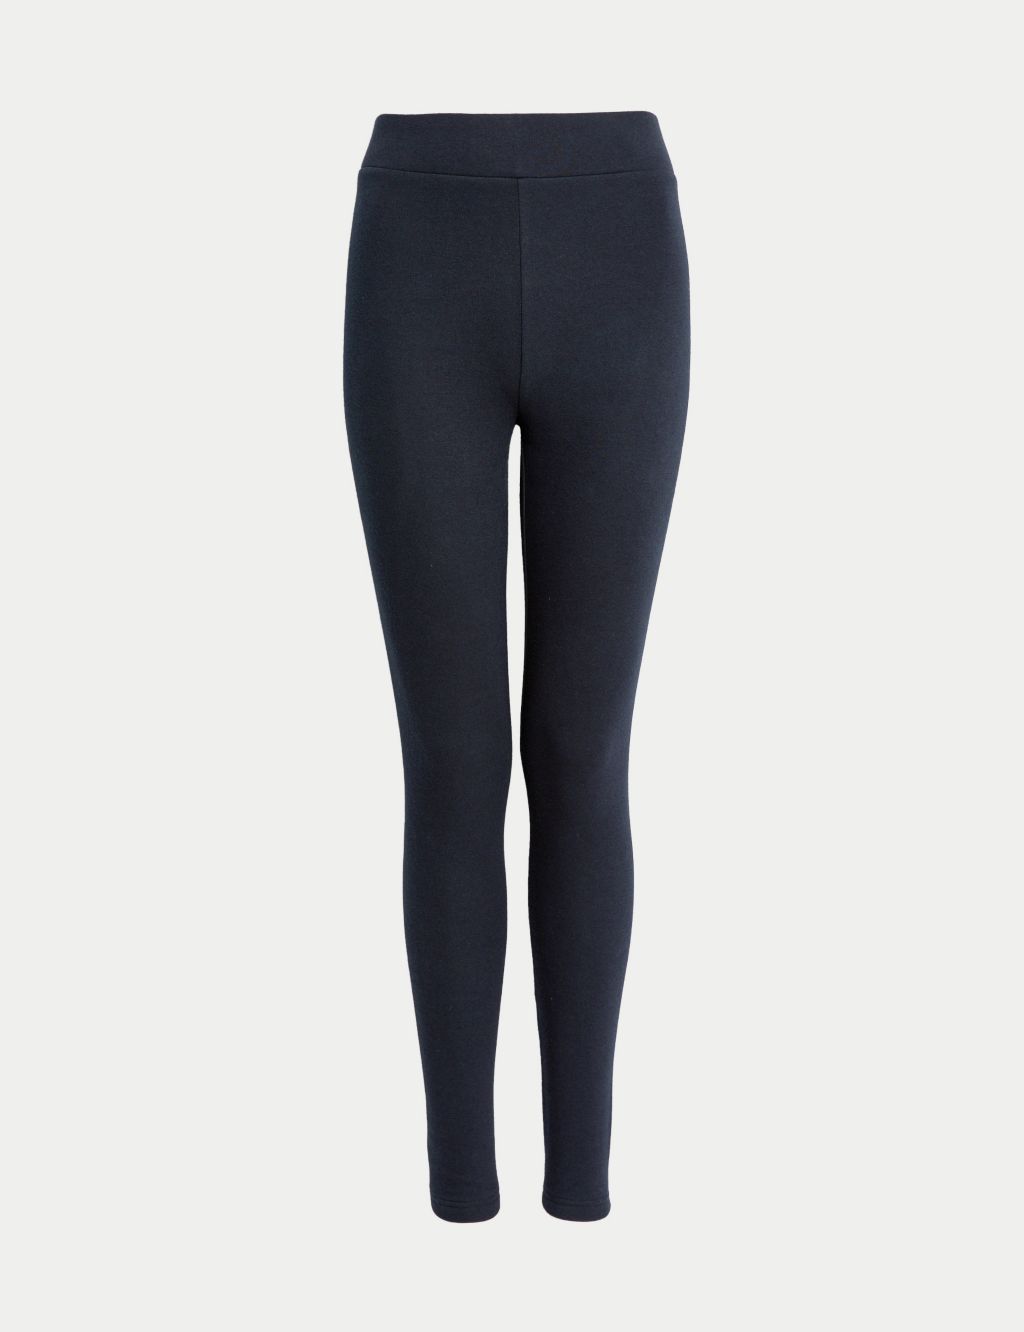 Thermal High Waisted Leggings image 2